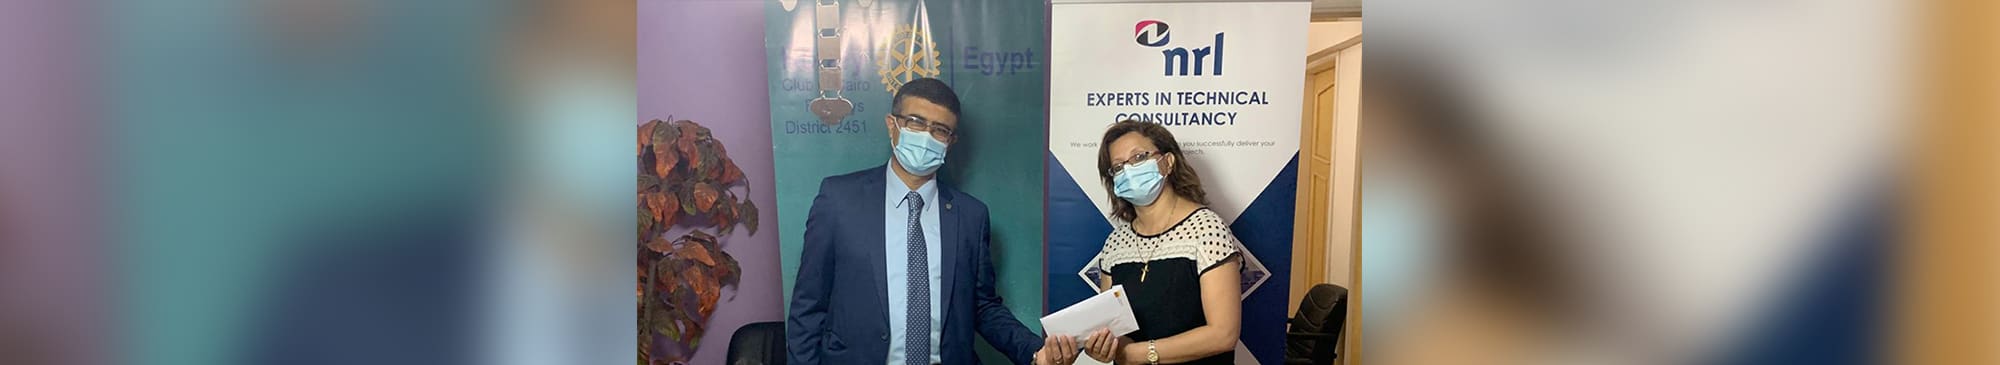 A picture of Hazem and a lady in Egypt - both wearing facemasks